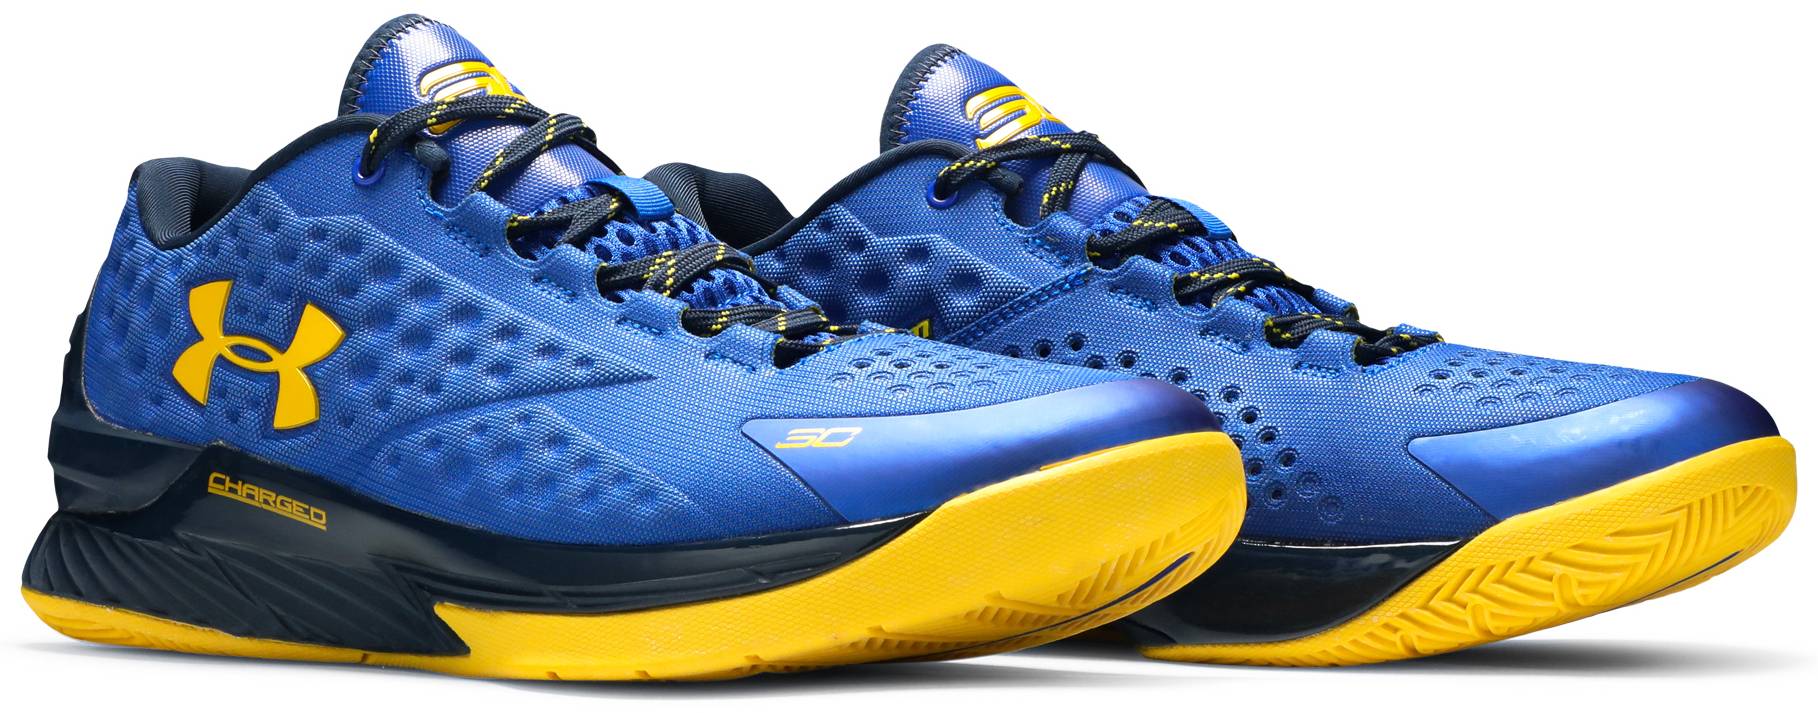 Curry 1 Low 'Warriors' - Under Armour - 1269048 400 | GOAT